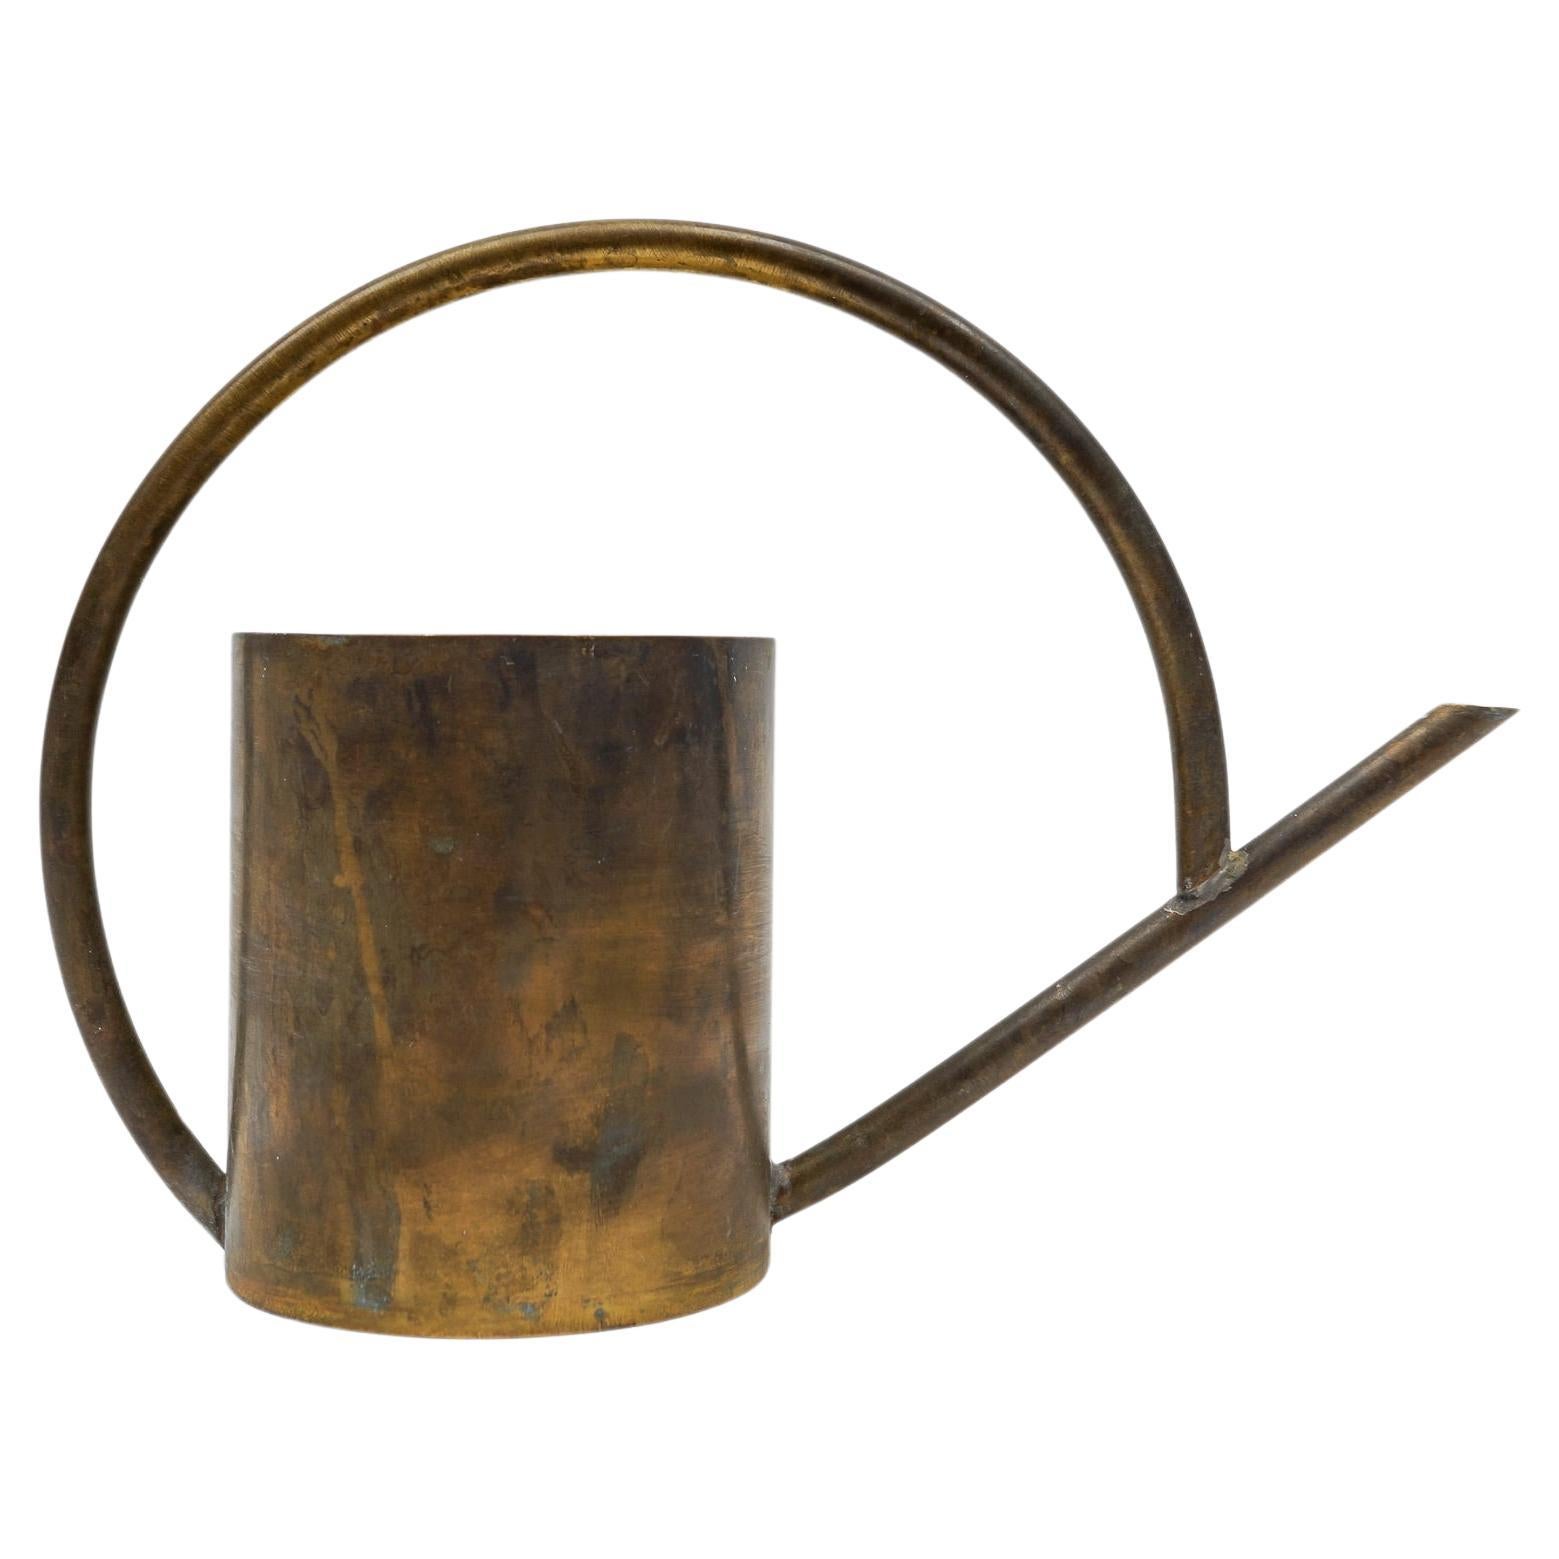 Art Deco Bauhaus  Watering Can in Massive Brass, 1930s / 1940s Germany For Sale